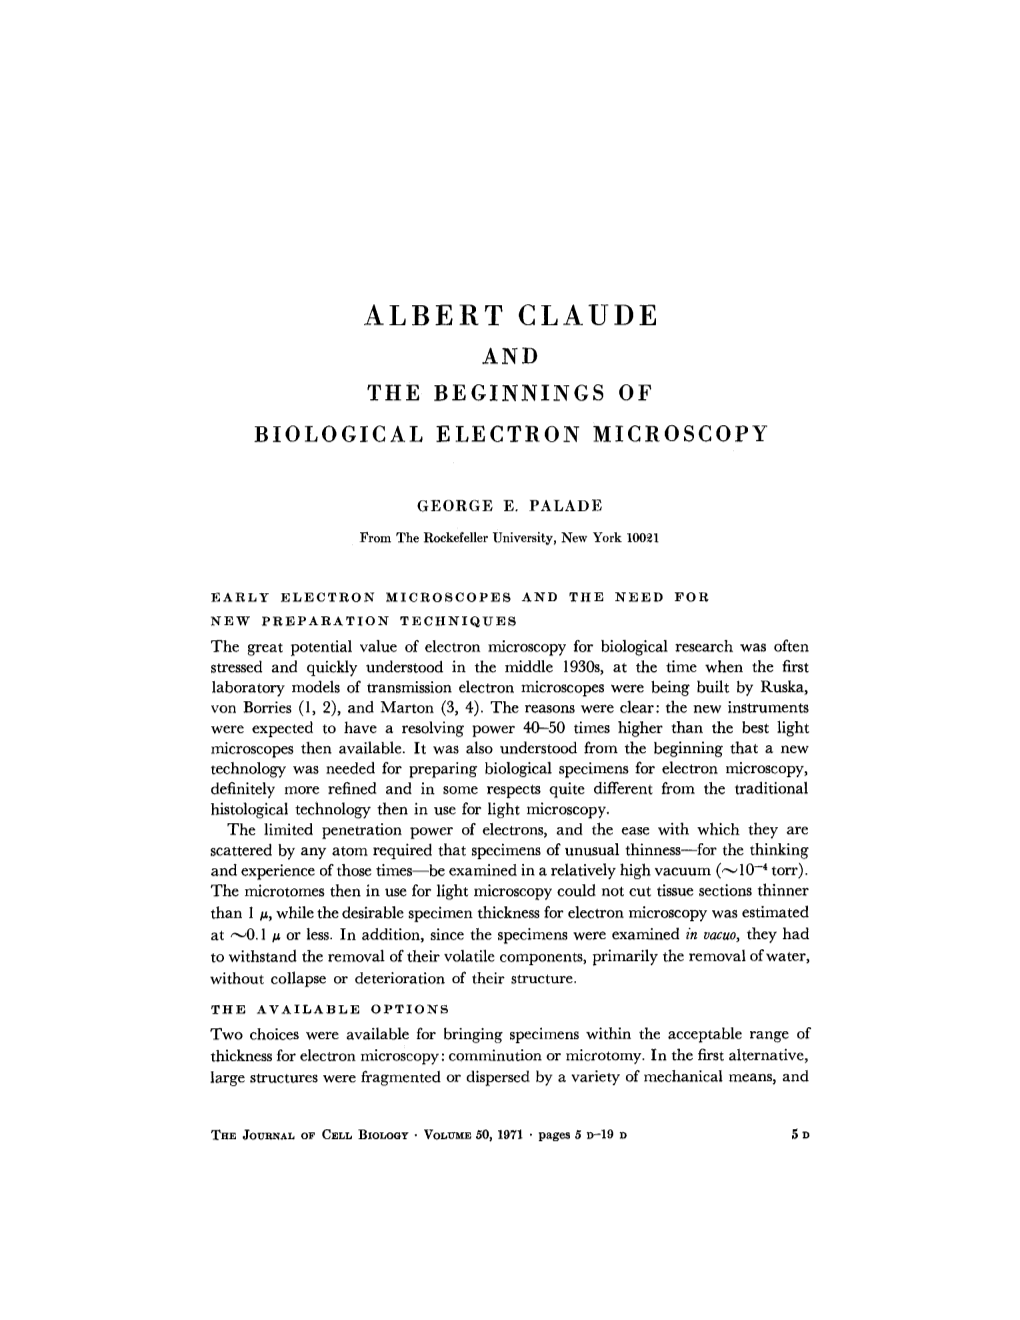 Albert Claude and the Beginnistgs of Biological Electron Microscopy